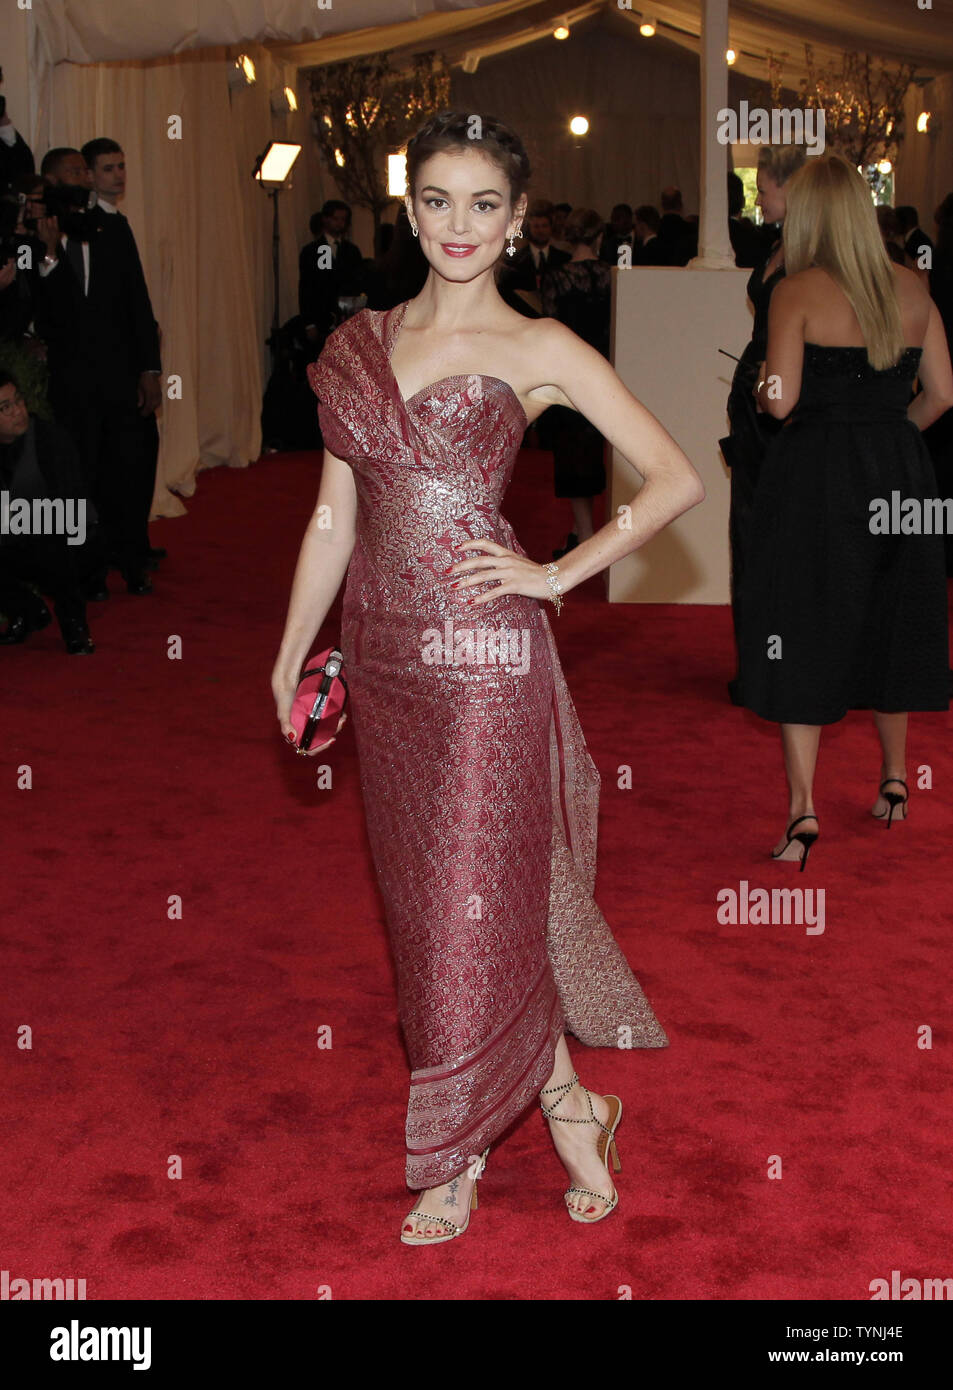 Nora Zehetner arrives on the red carpet at the Costume Institute Benefit for the 'PUNK: Chaos to Couture' exhibition at the Metropolitan Museum of Art in New York City on May 6, 2013.    UPI/John Angelillo Stock Photo